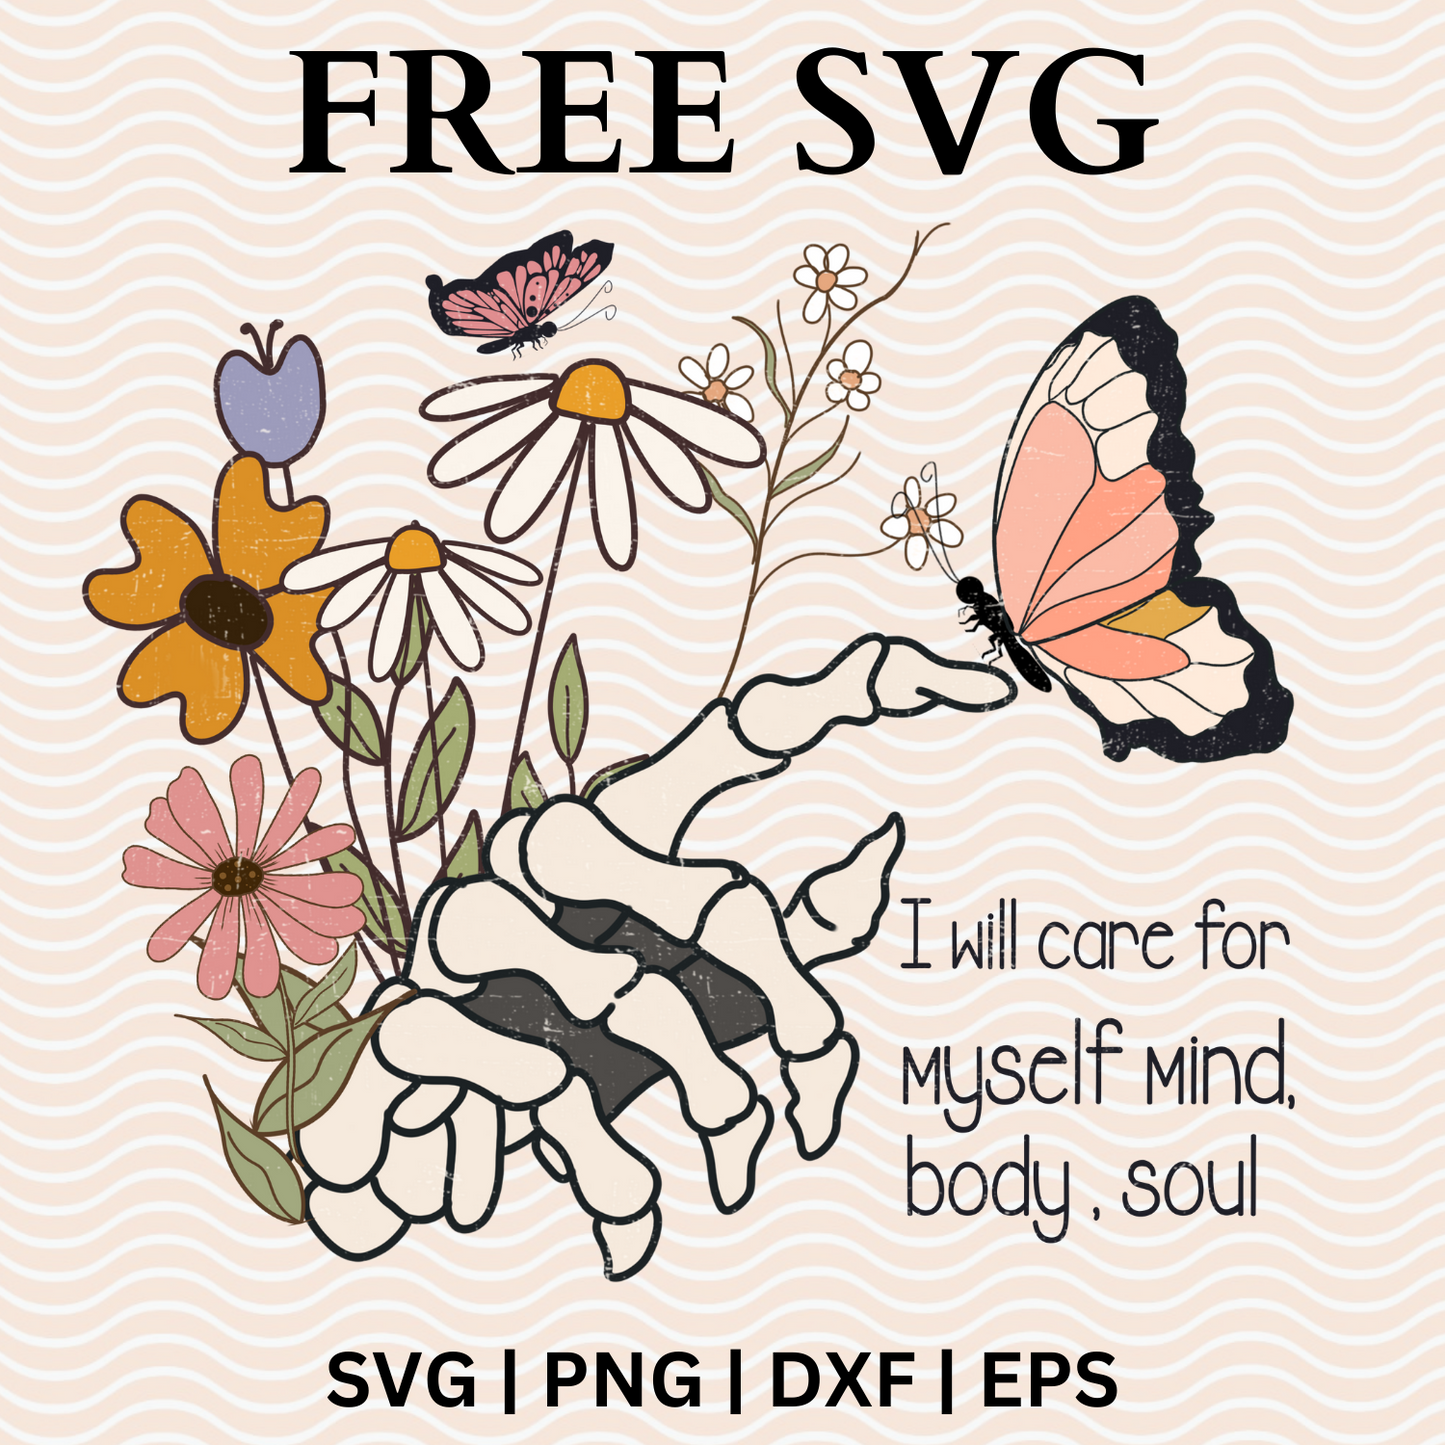 I will care for mySelf mind body, soul SVG Free File For Cricut & PNG Download-8SVG